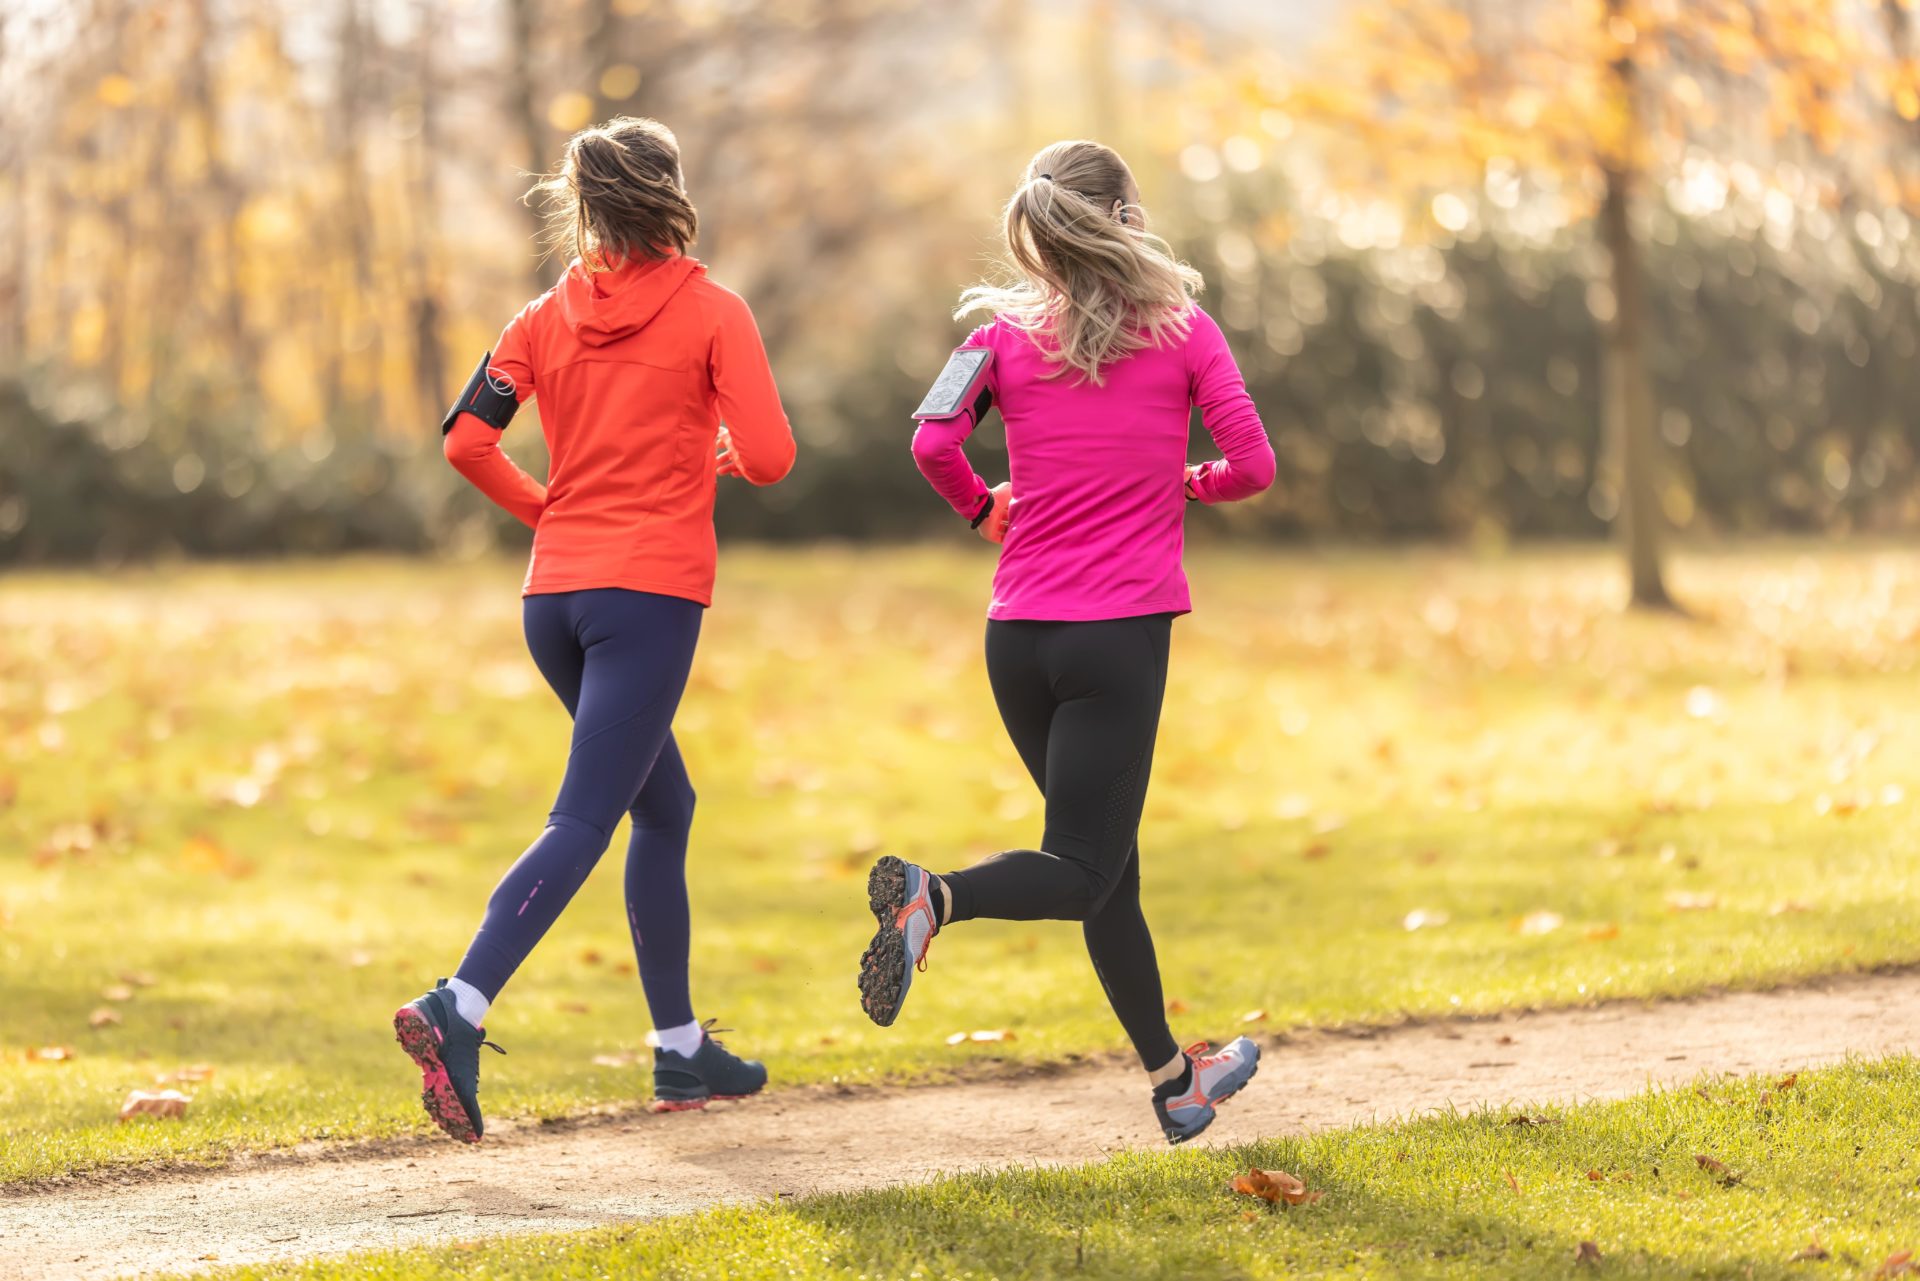 #GirlRun: Two young fitness women running in the autumn park.